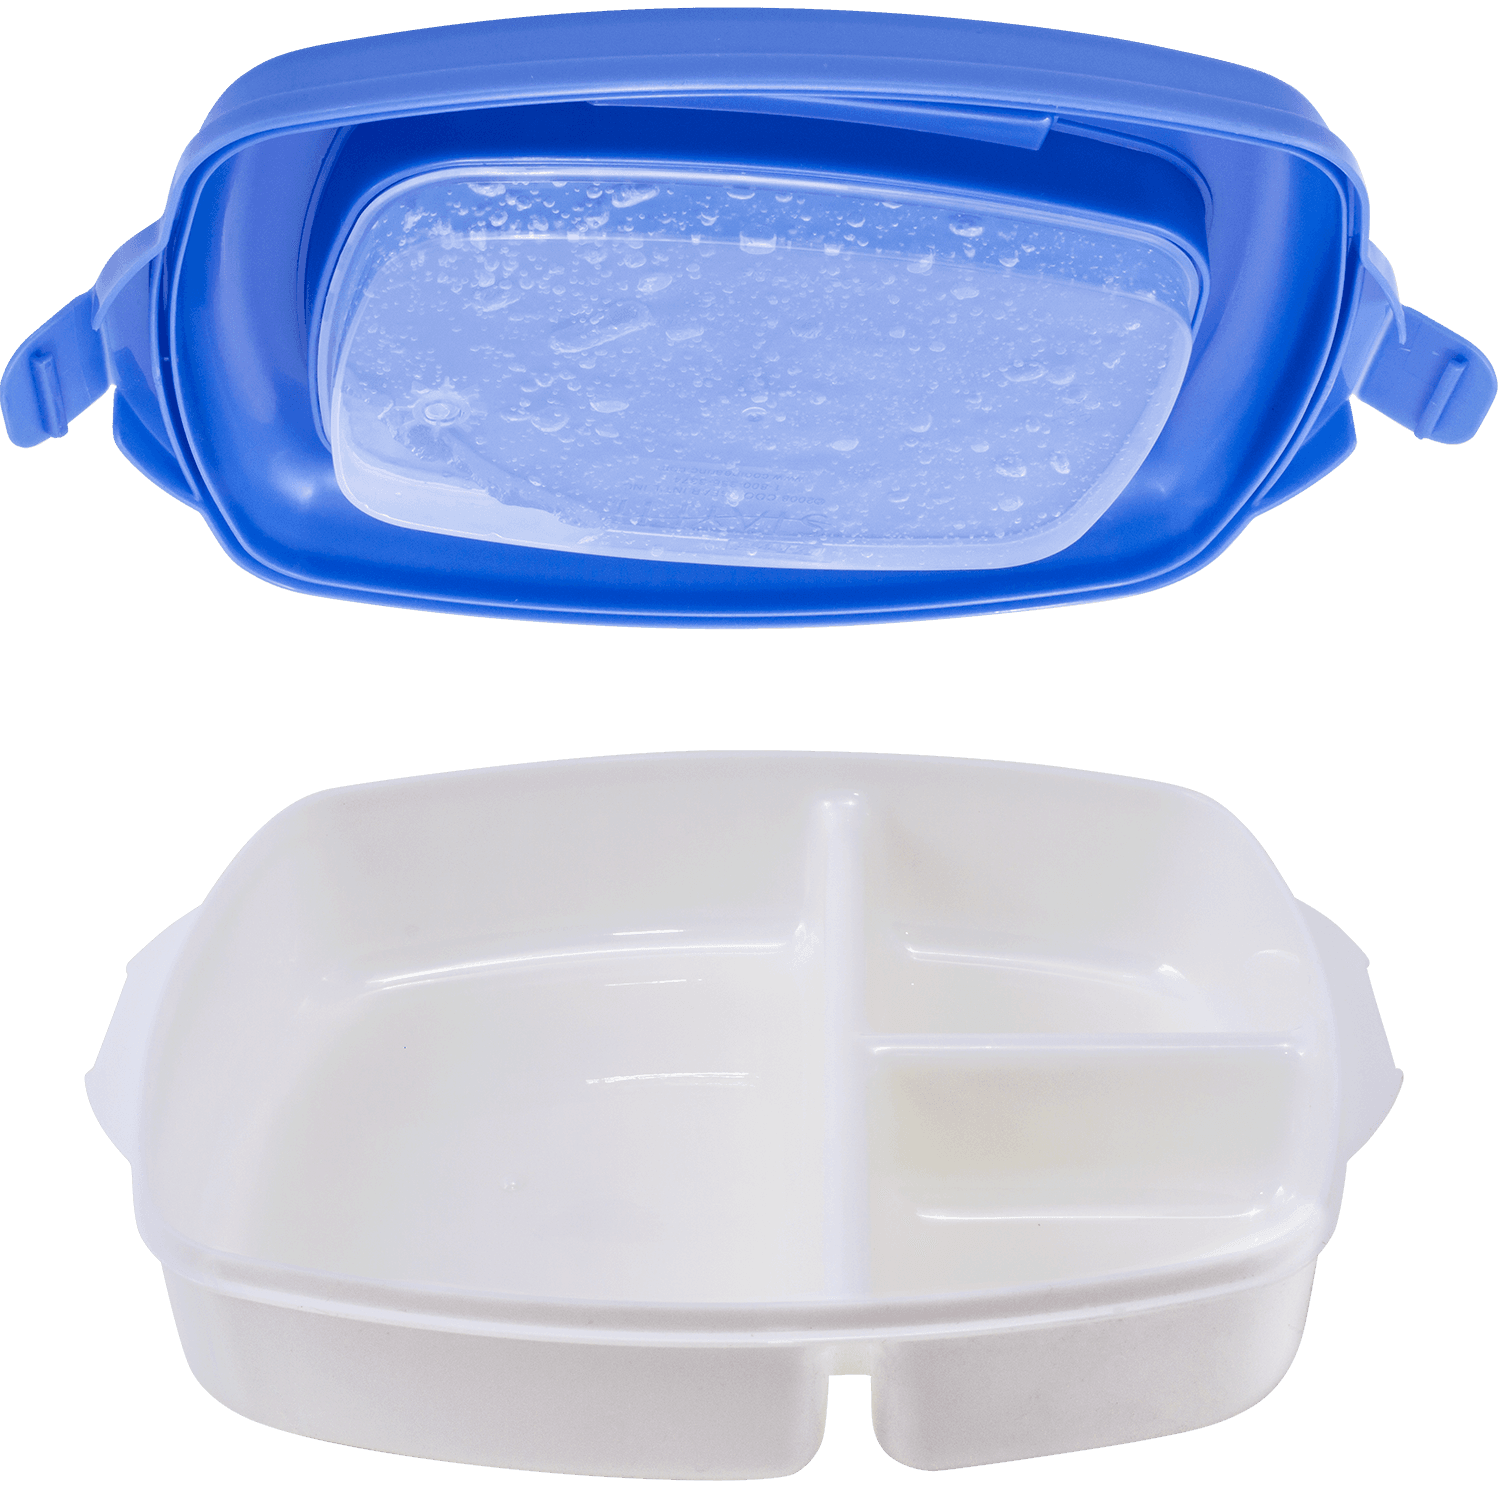 SideDeal: 2-Pack: Cool Gear EZ Freeze Deluxe Salad Kits